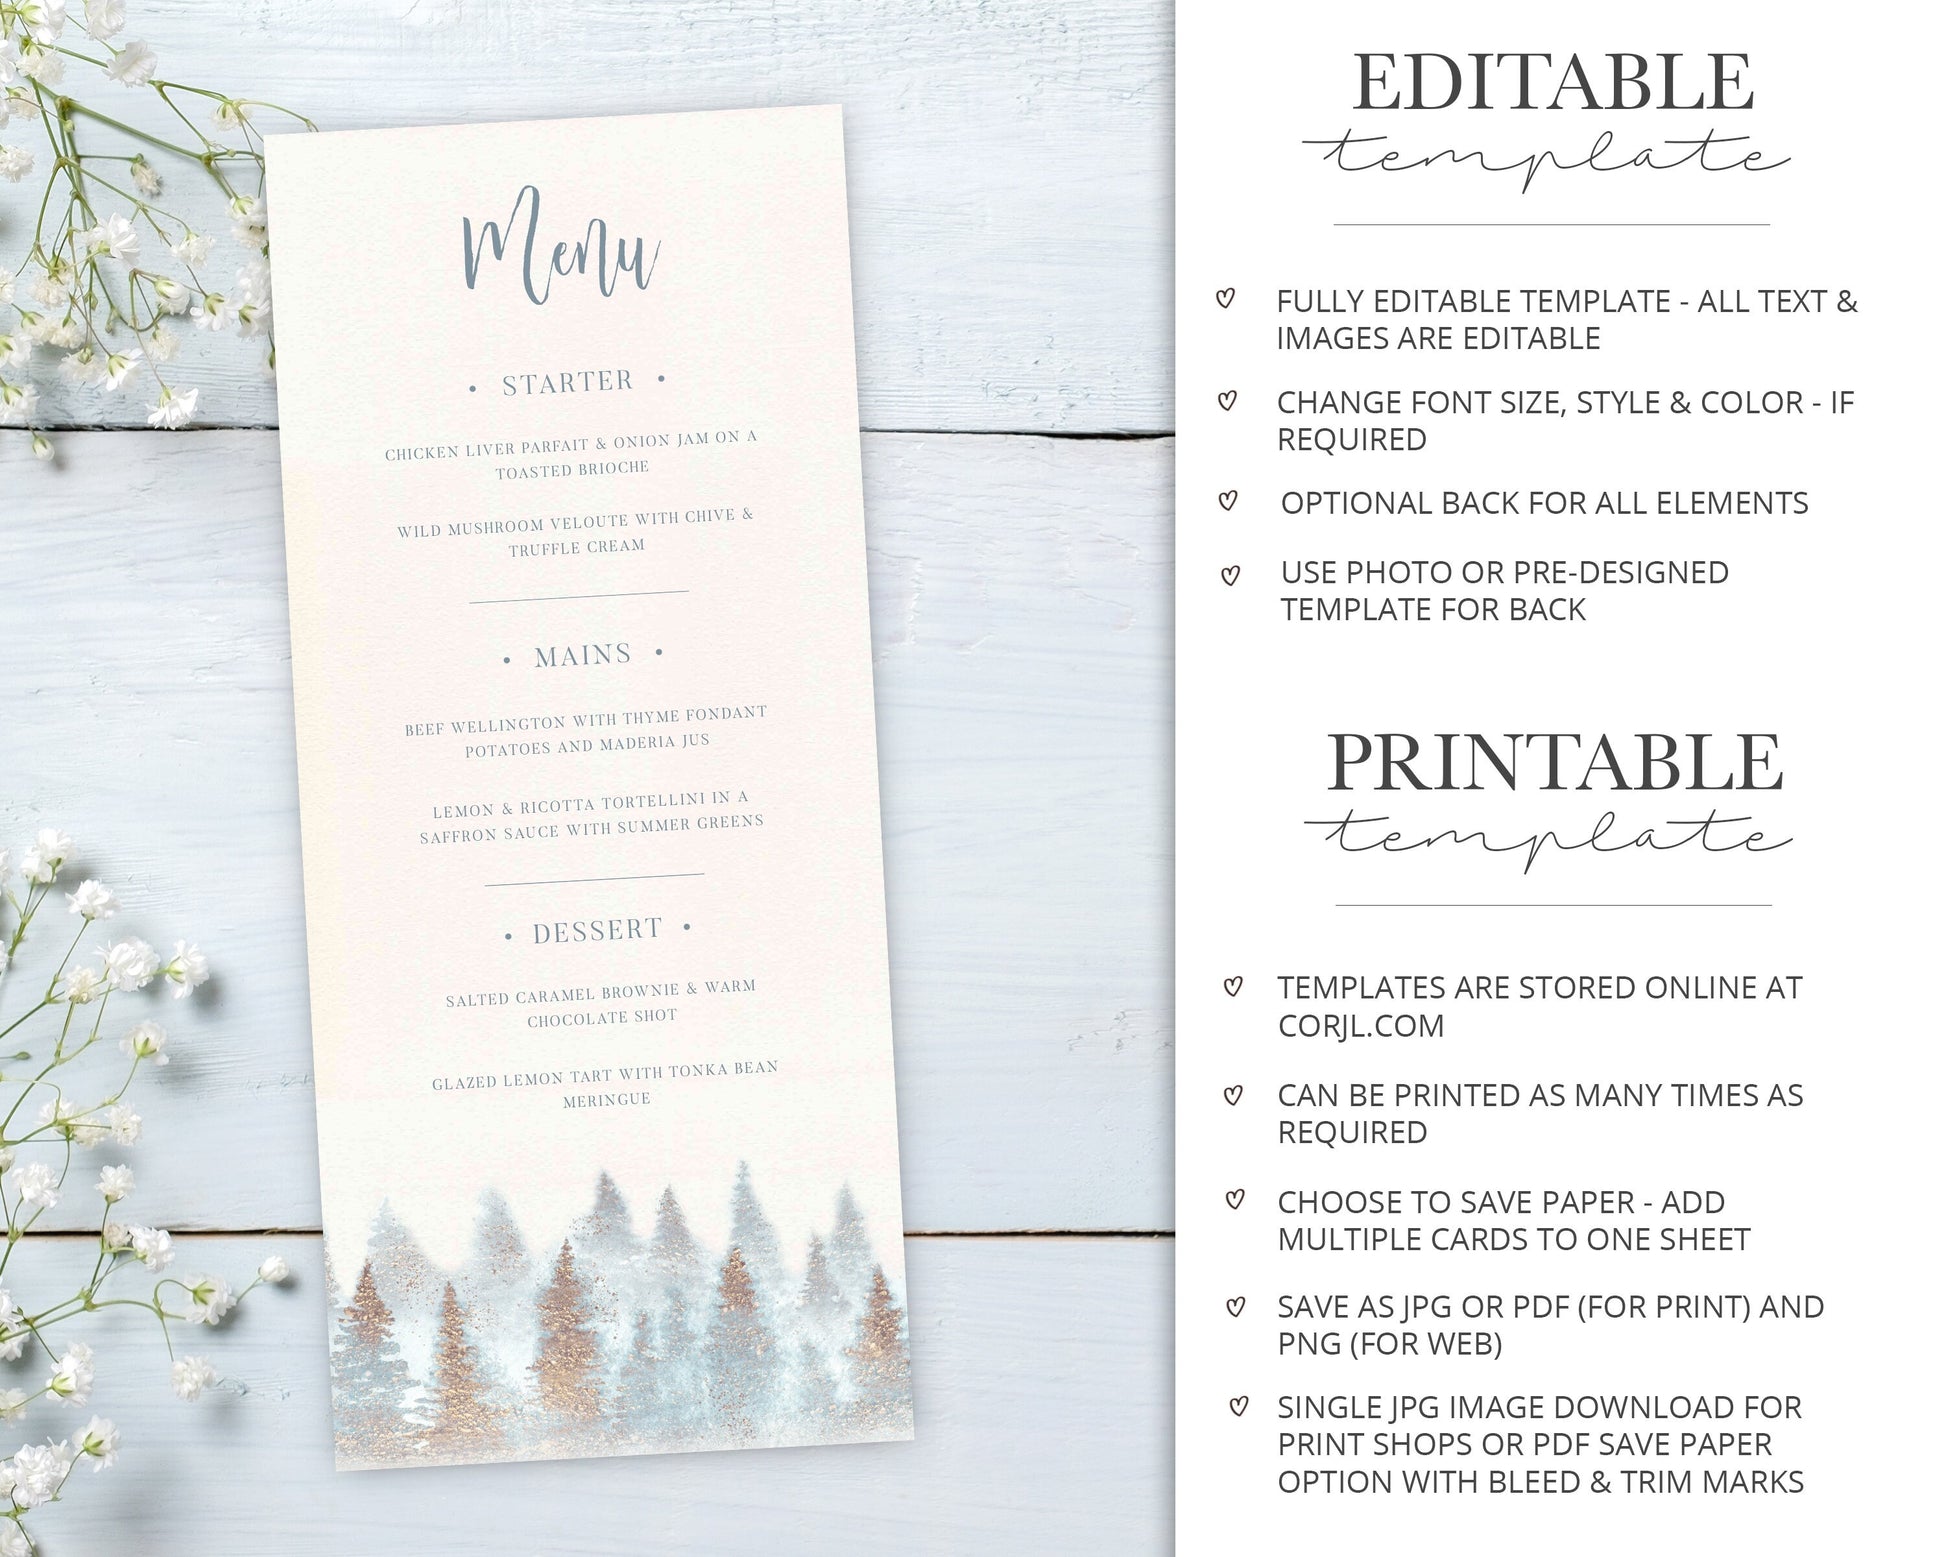 MENU Ethereal Pine Wedding Stationery Suite  |  Instant Download  |  Printable Event Invitations | Bundle | Editable Template